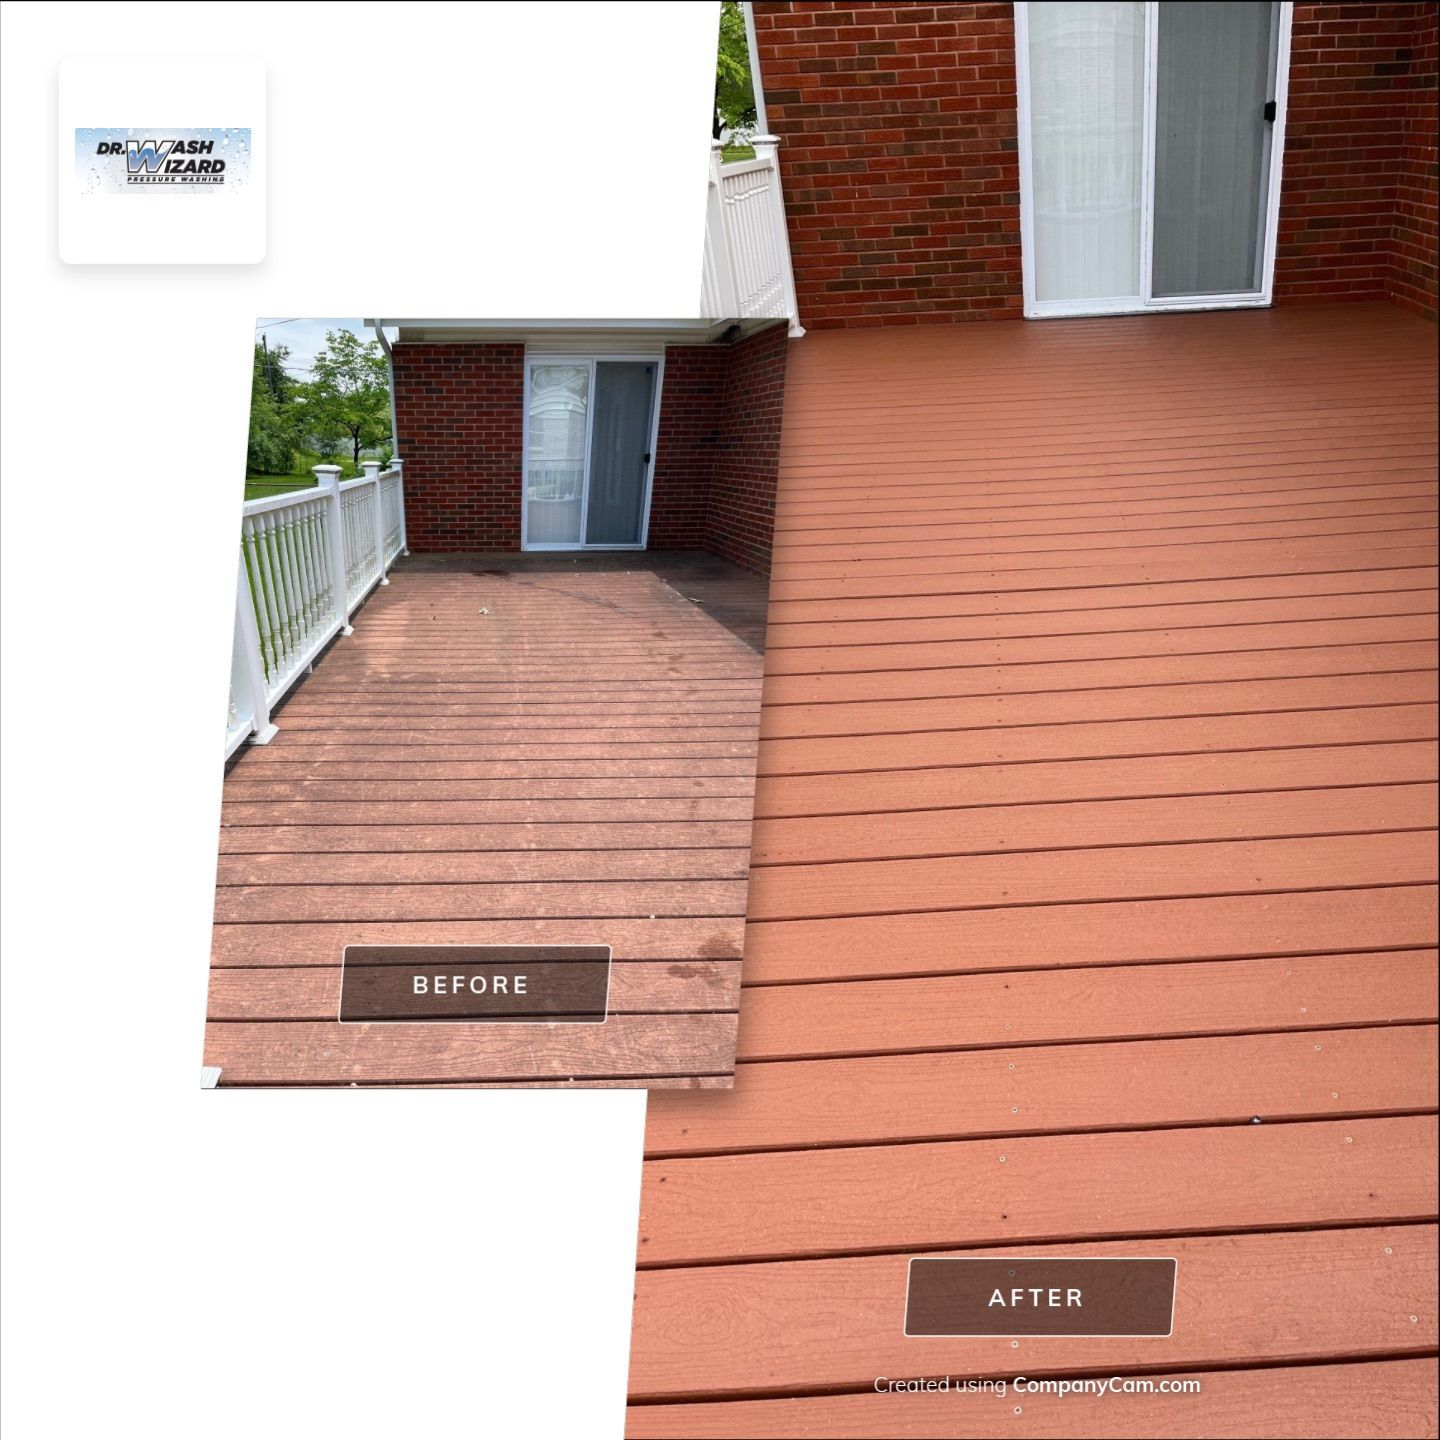  Is Your Florissant Home Composite Trex Deck Looking Less Than Tranquil? Dr. Wash Wizard to the Rescue!